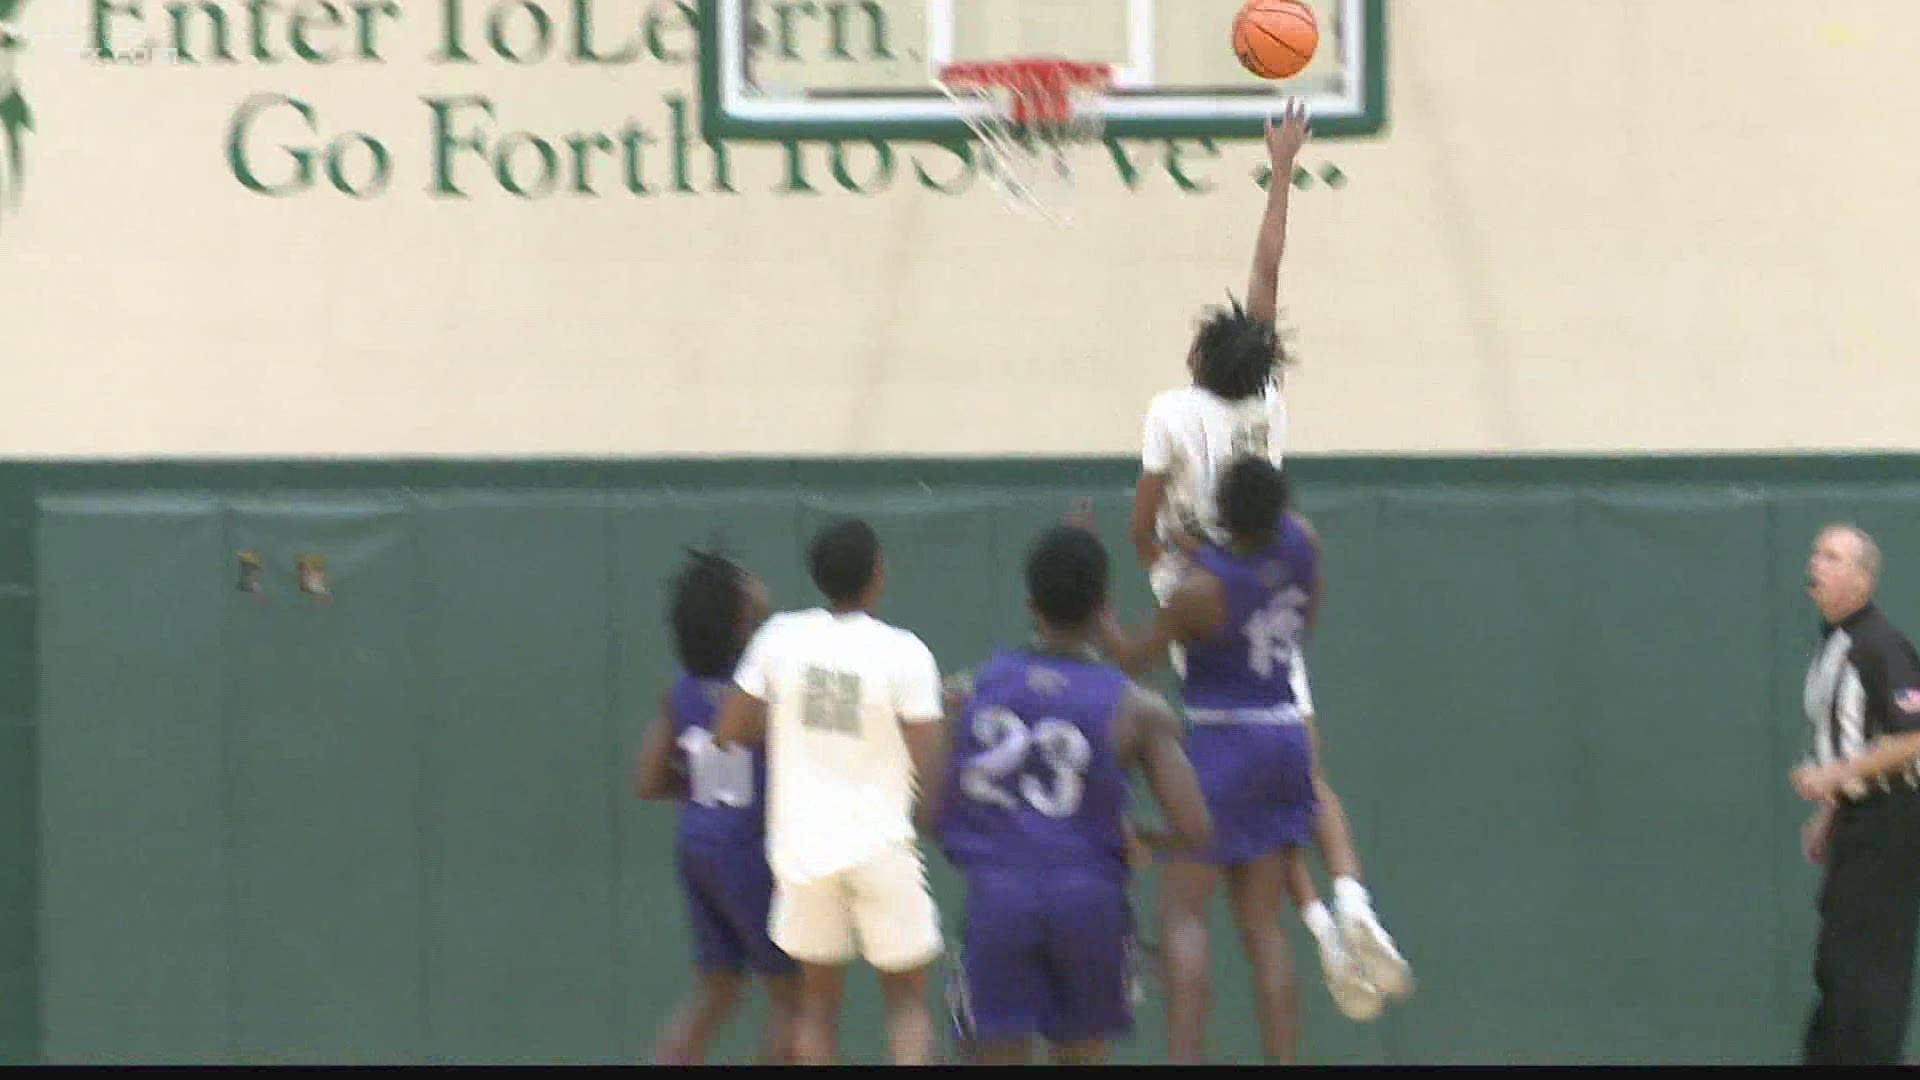 Highlights from playoff games in Class 5A involving Ridge View and Dutch Fork.